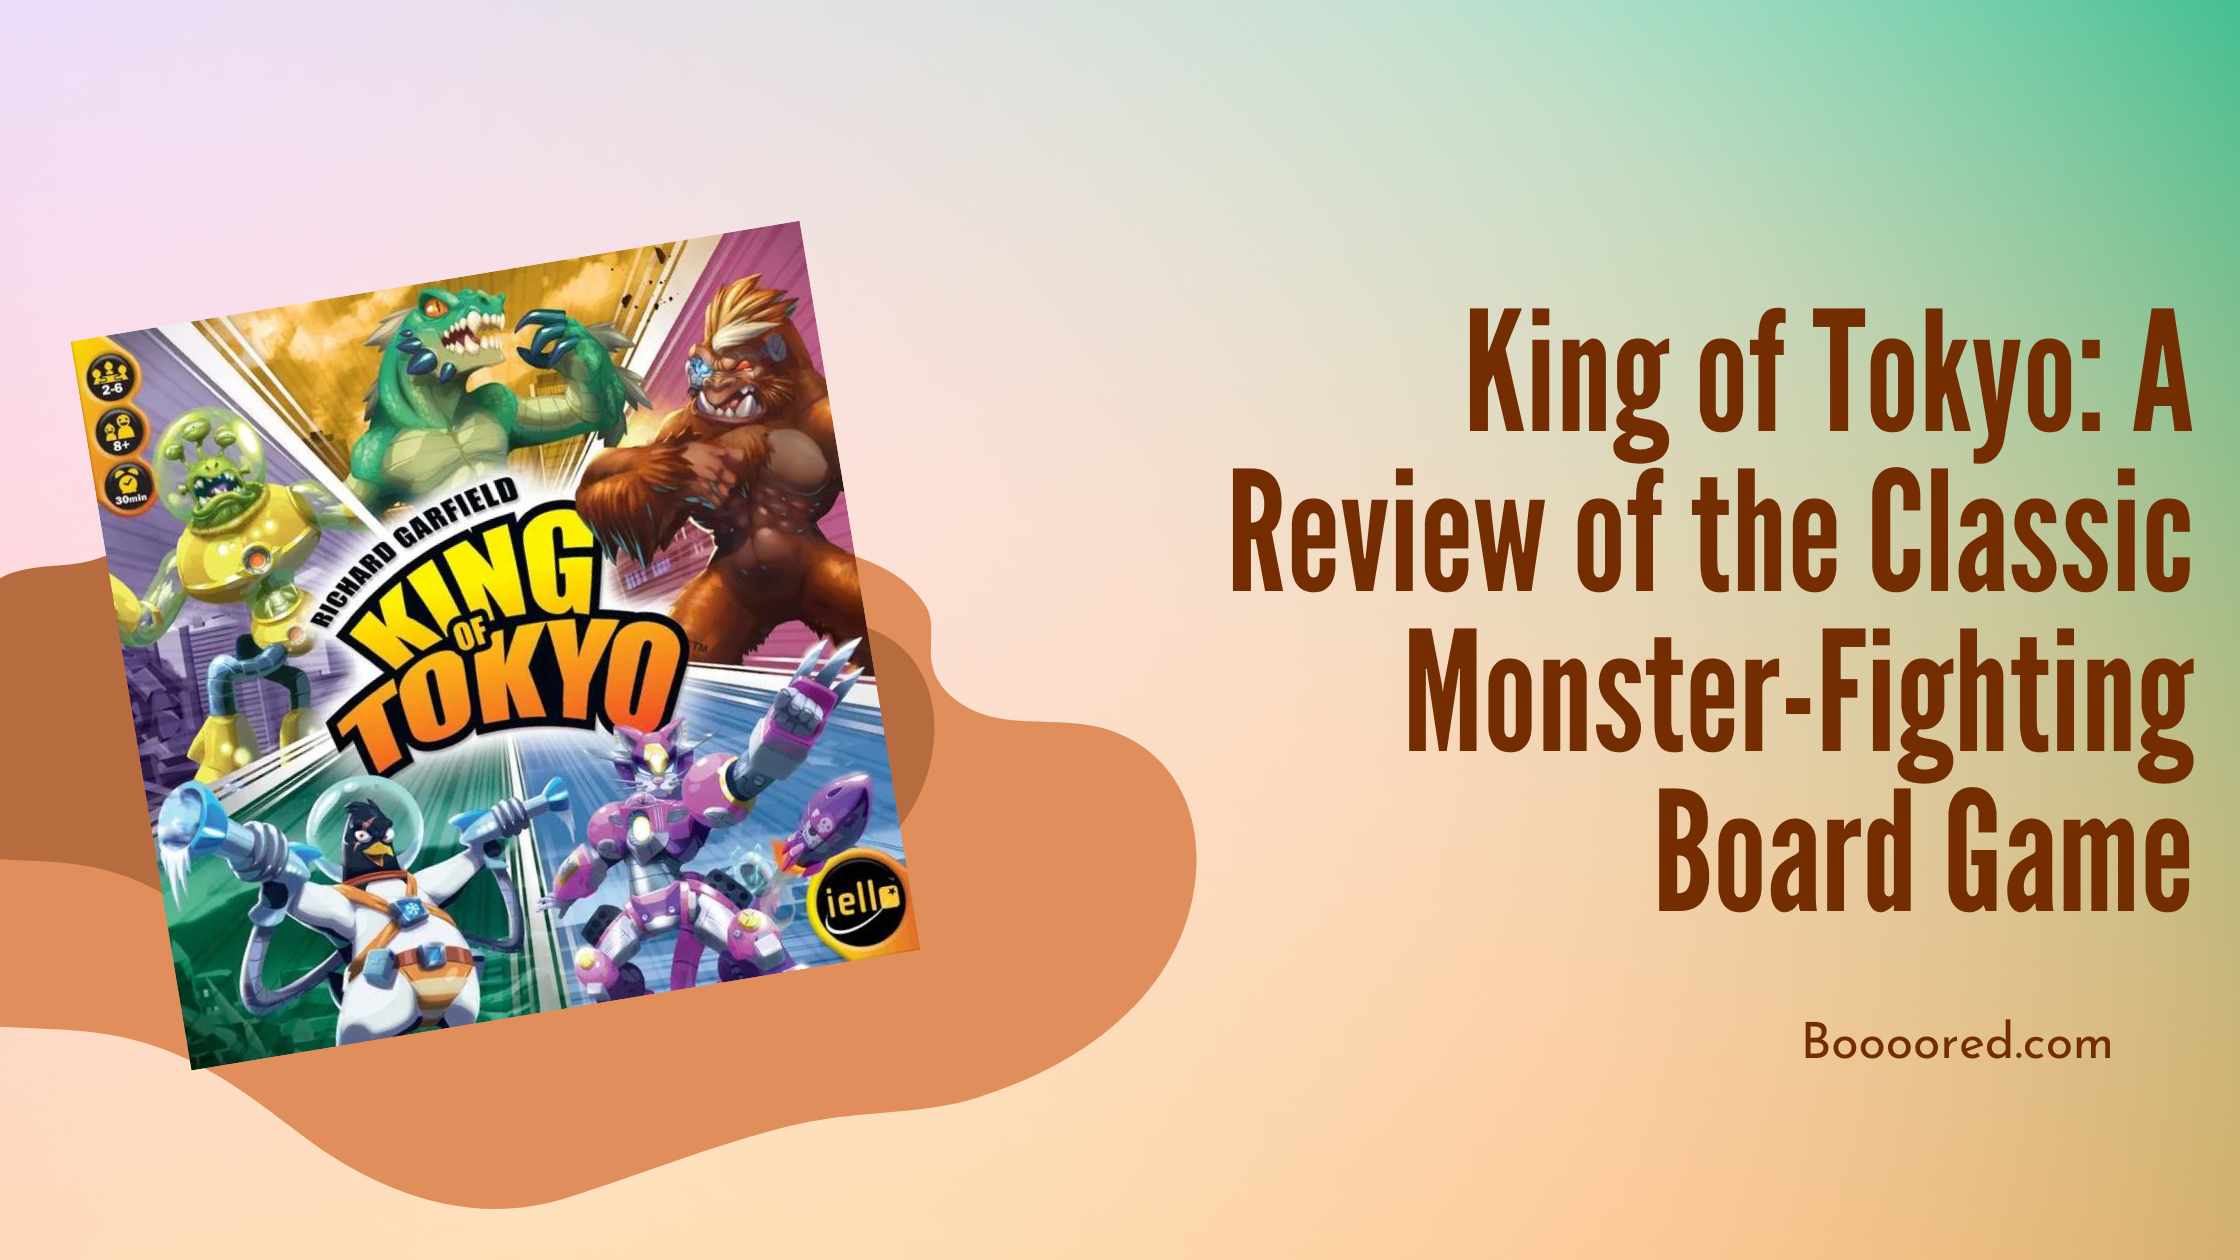 King of Tokyo A Review of the Classic Monster-Fighting Board Game